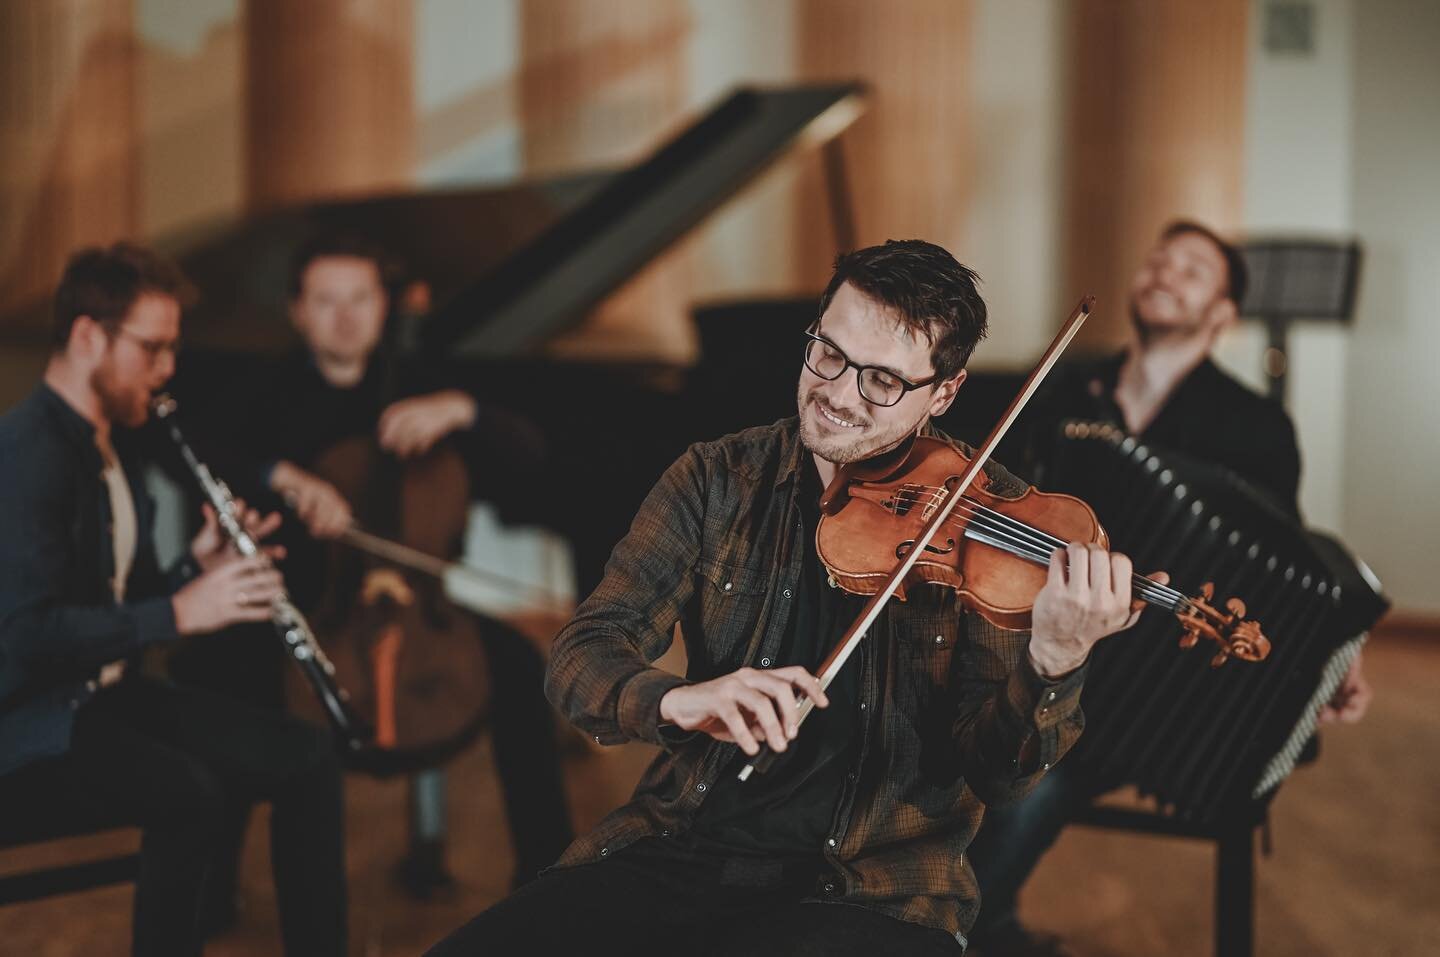 We call him &bdquo;Konzertmeister&ldquo;, and he really is that for us. Stefan P&ouml;chhacker has made the violins in the best Austrian orchestras even better, and is currently doing so in Wiener Symphoniker. With his playing and his witty moderatio